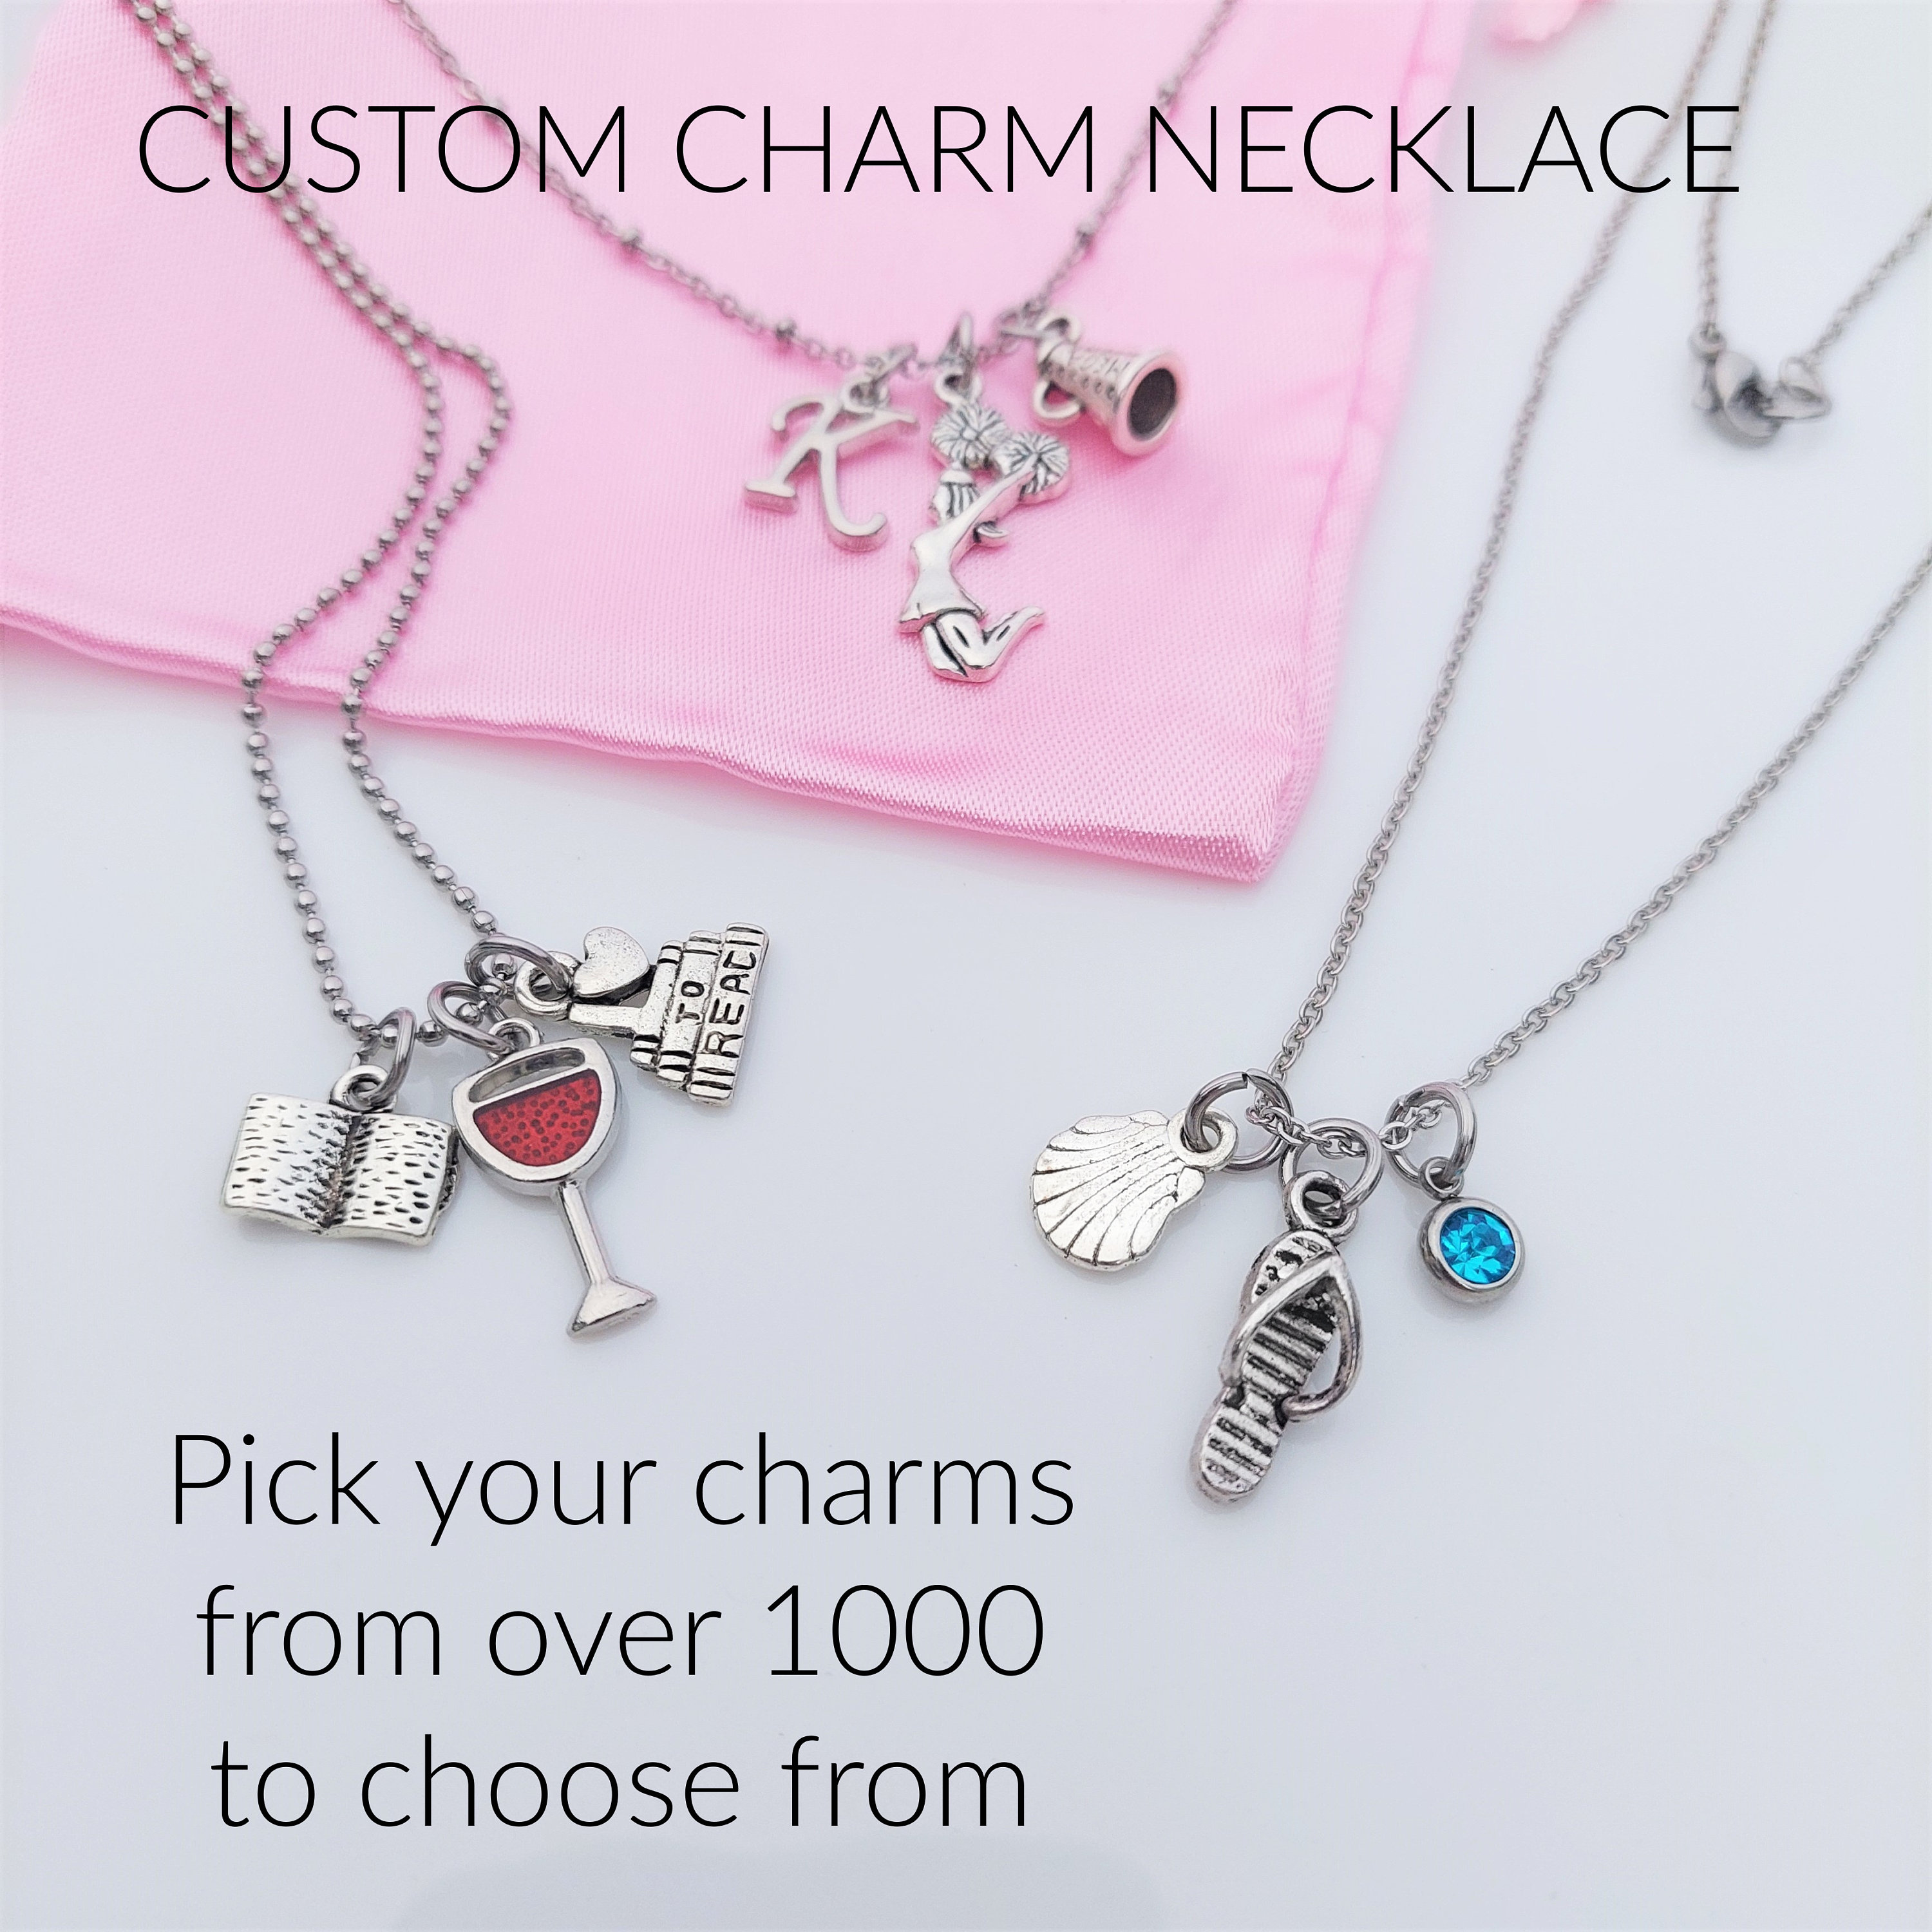 Create Personalized Name Necklace That Will Never Go Out of Style